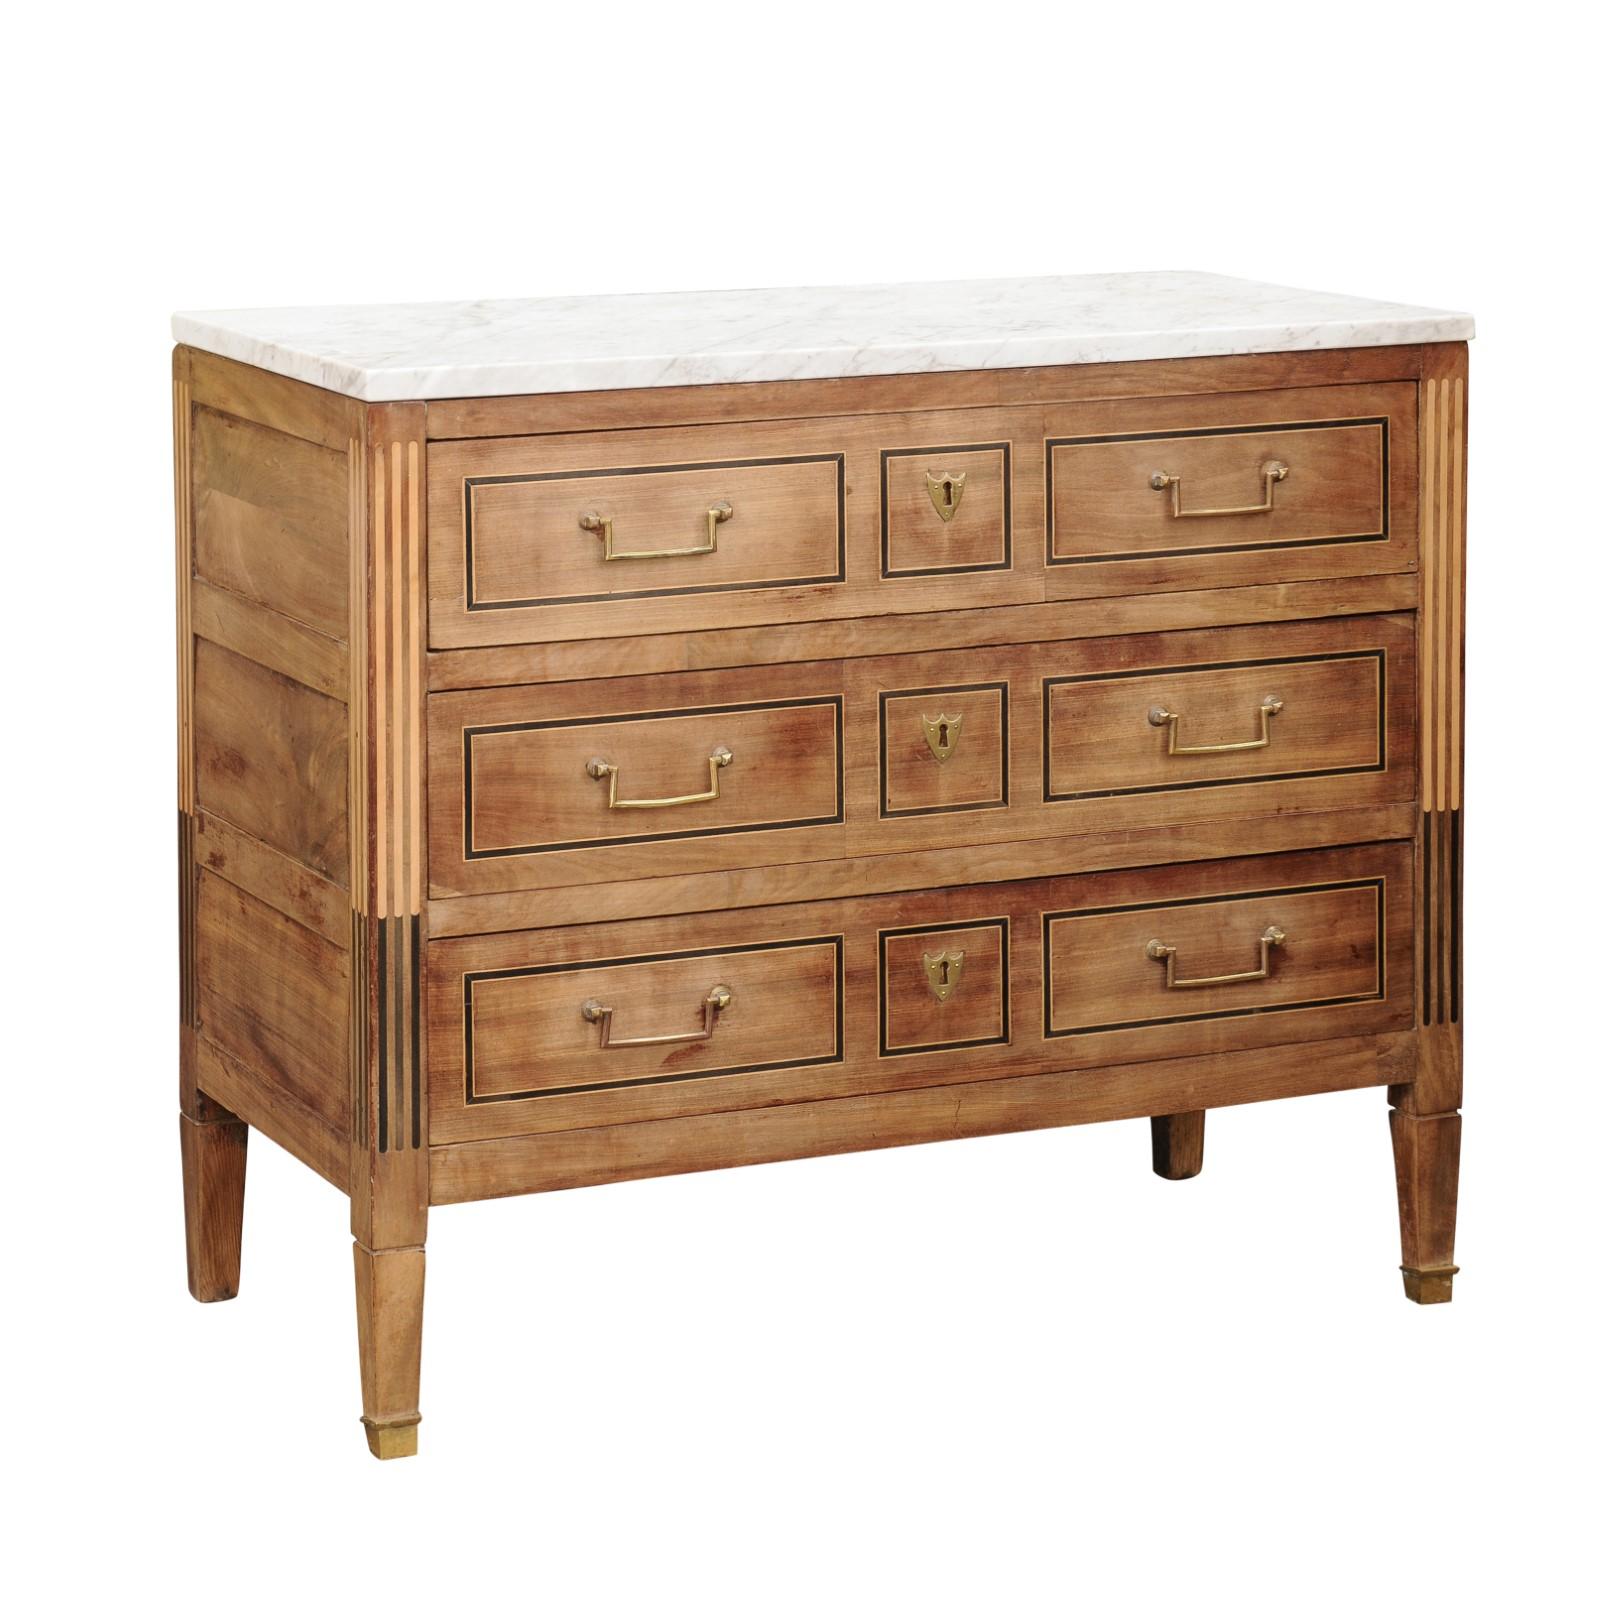 French 1800s Directoire Three-Drawer Walnut Commode with White Veined Marble Top